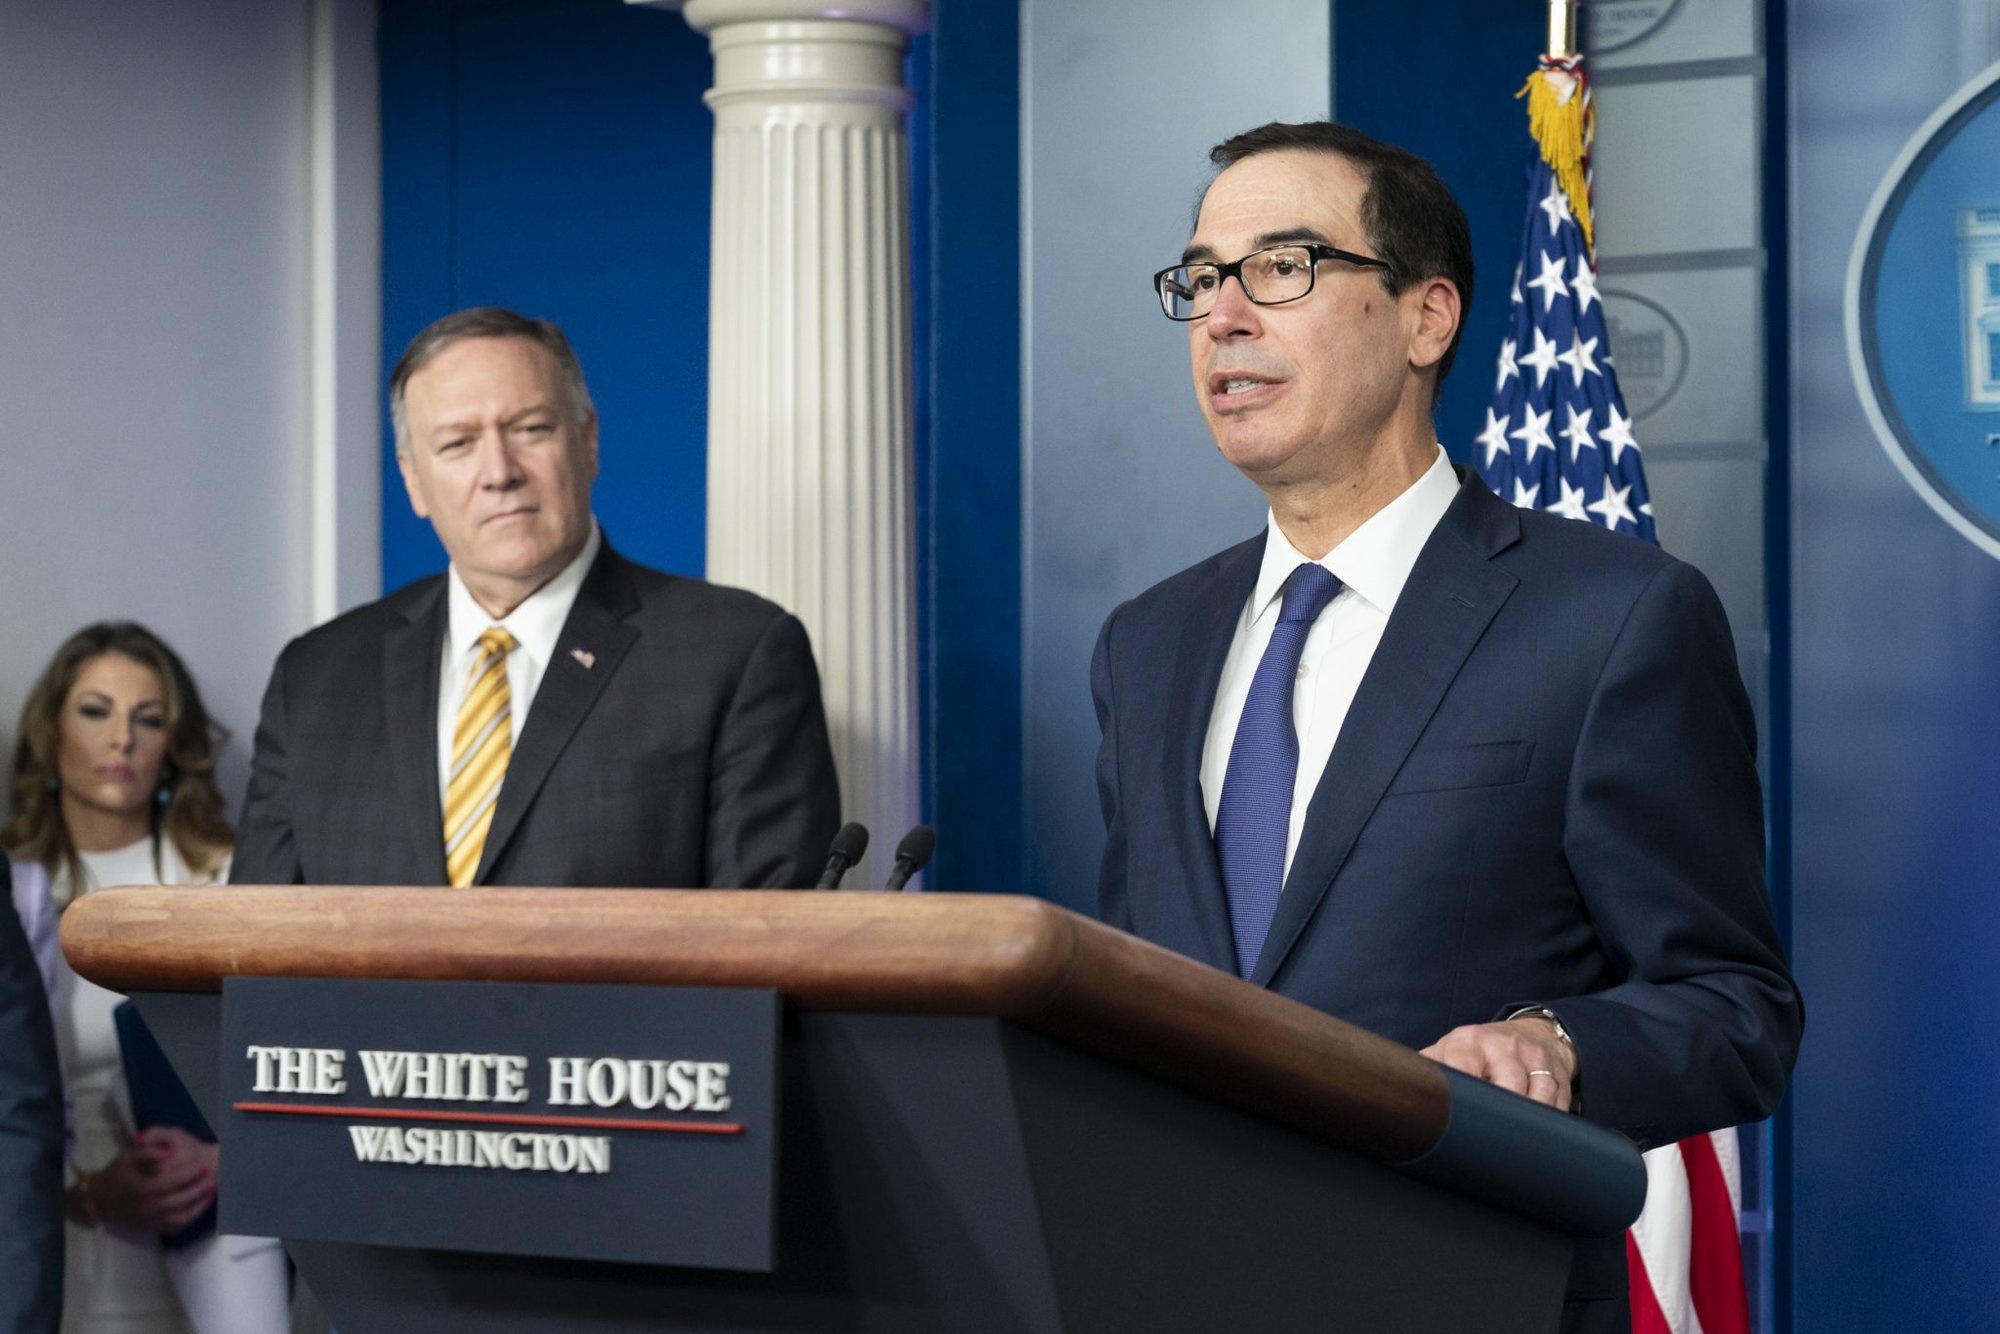 Secretary of State Mike Pompeo and Secretary of the Treasury Steven Mnuchin speak to reporters Tuesday, Sept. 10, 2019, in the James S. Brady Press Briefing Room of the White House. Official White House Photo by Andrea Hanks